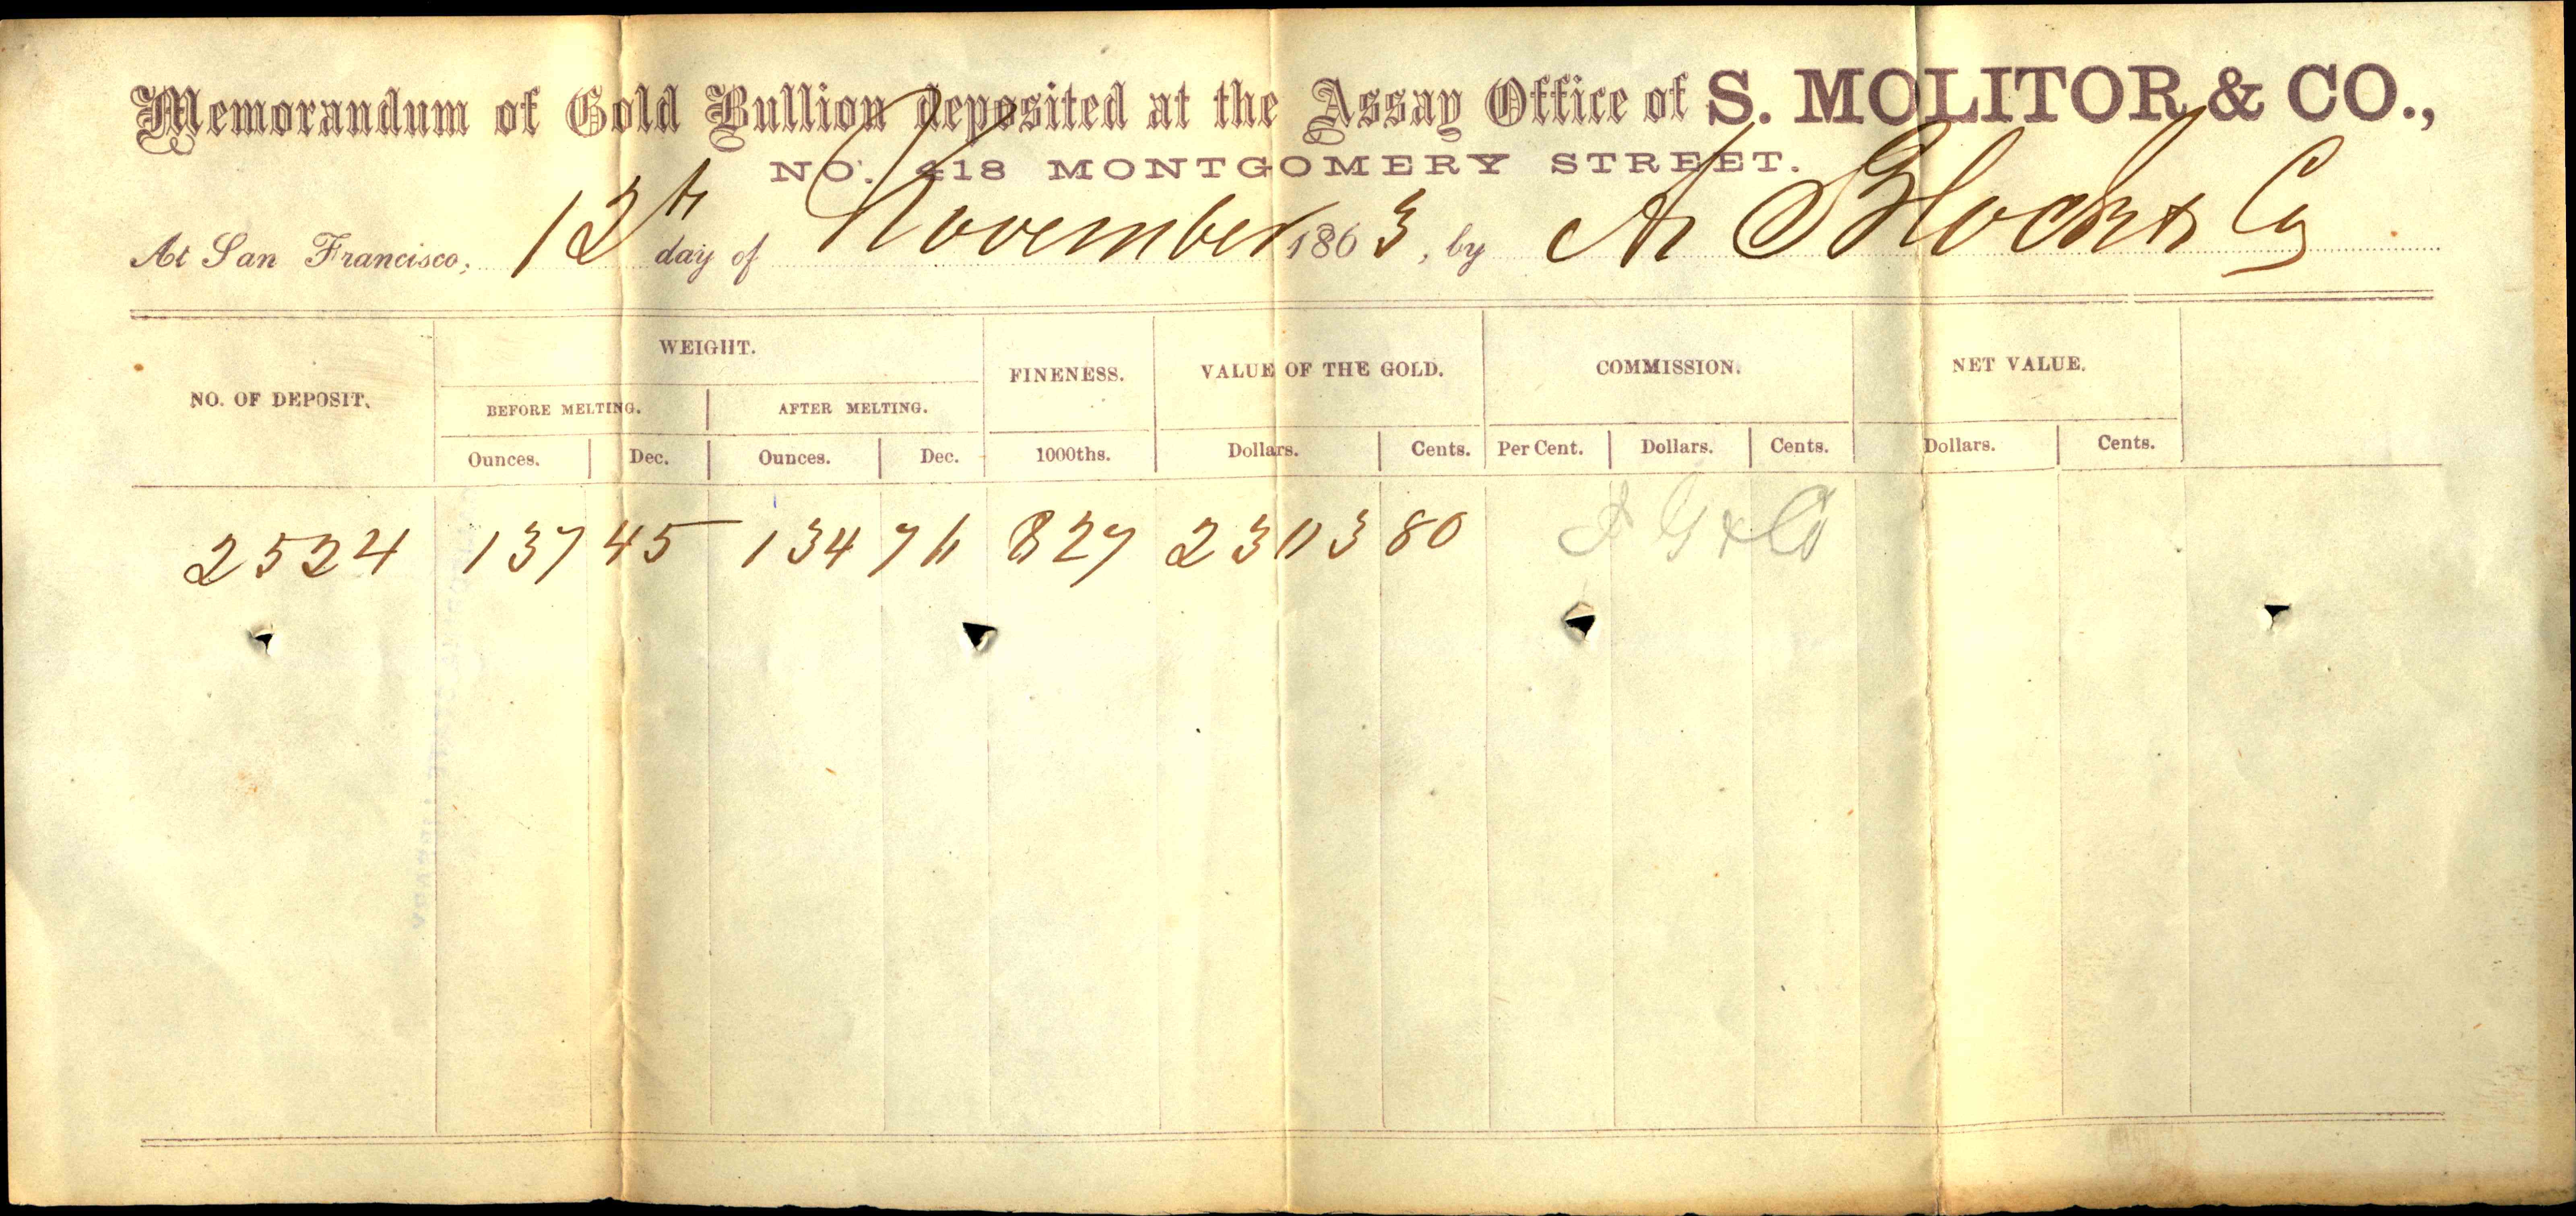 Receipt for deposited to S. Molitory & Co.